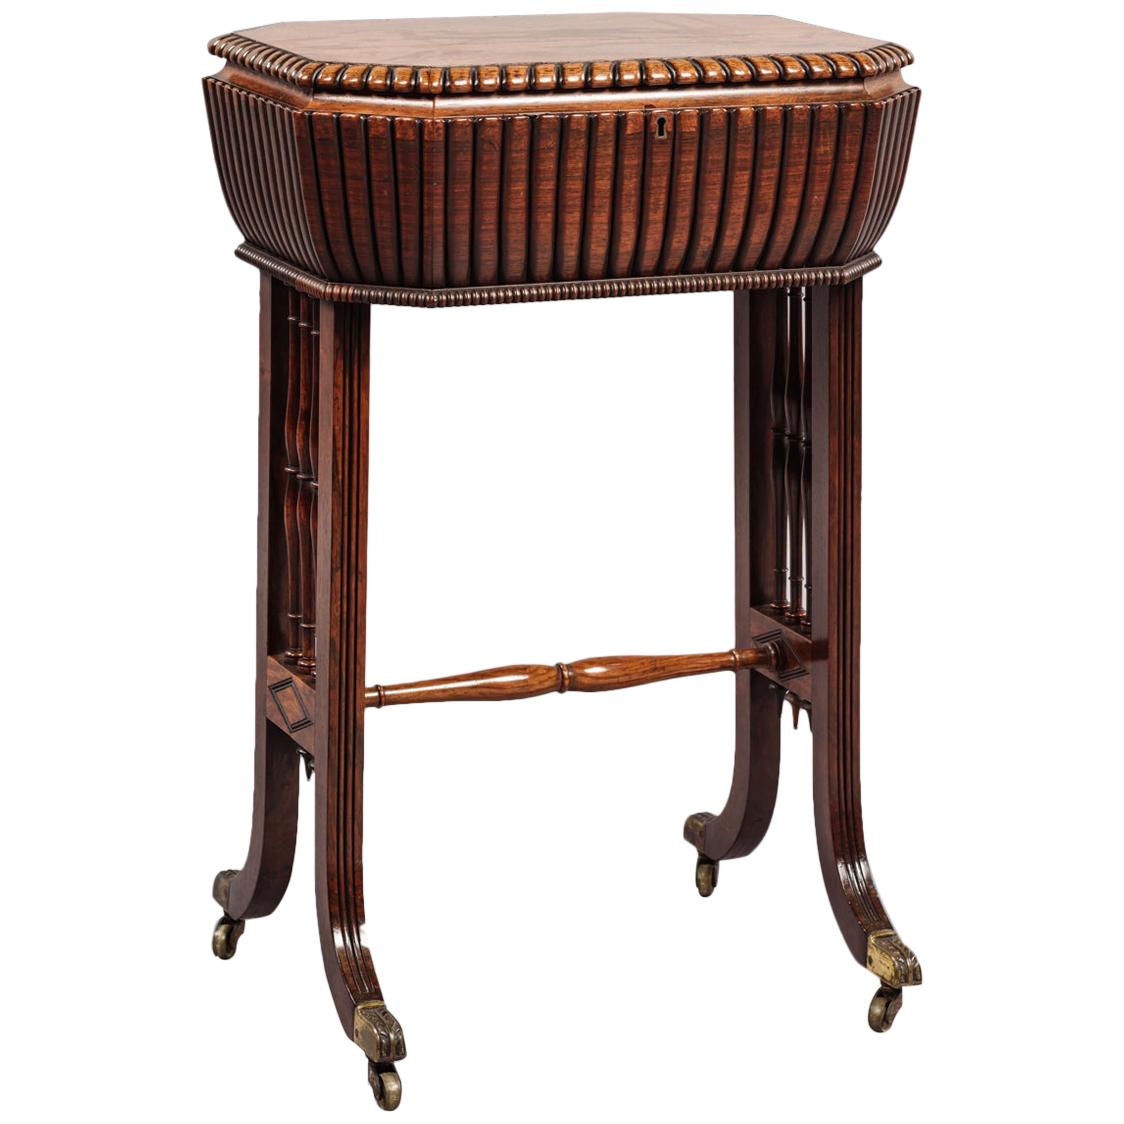 Work Table in the Manner of Gillows, English, circa 1820